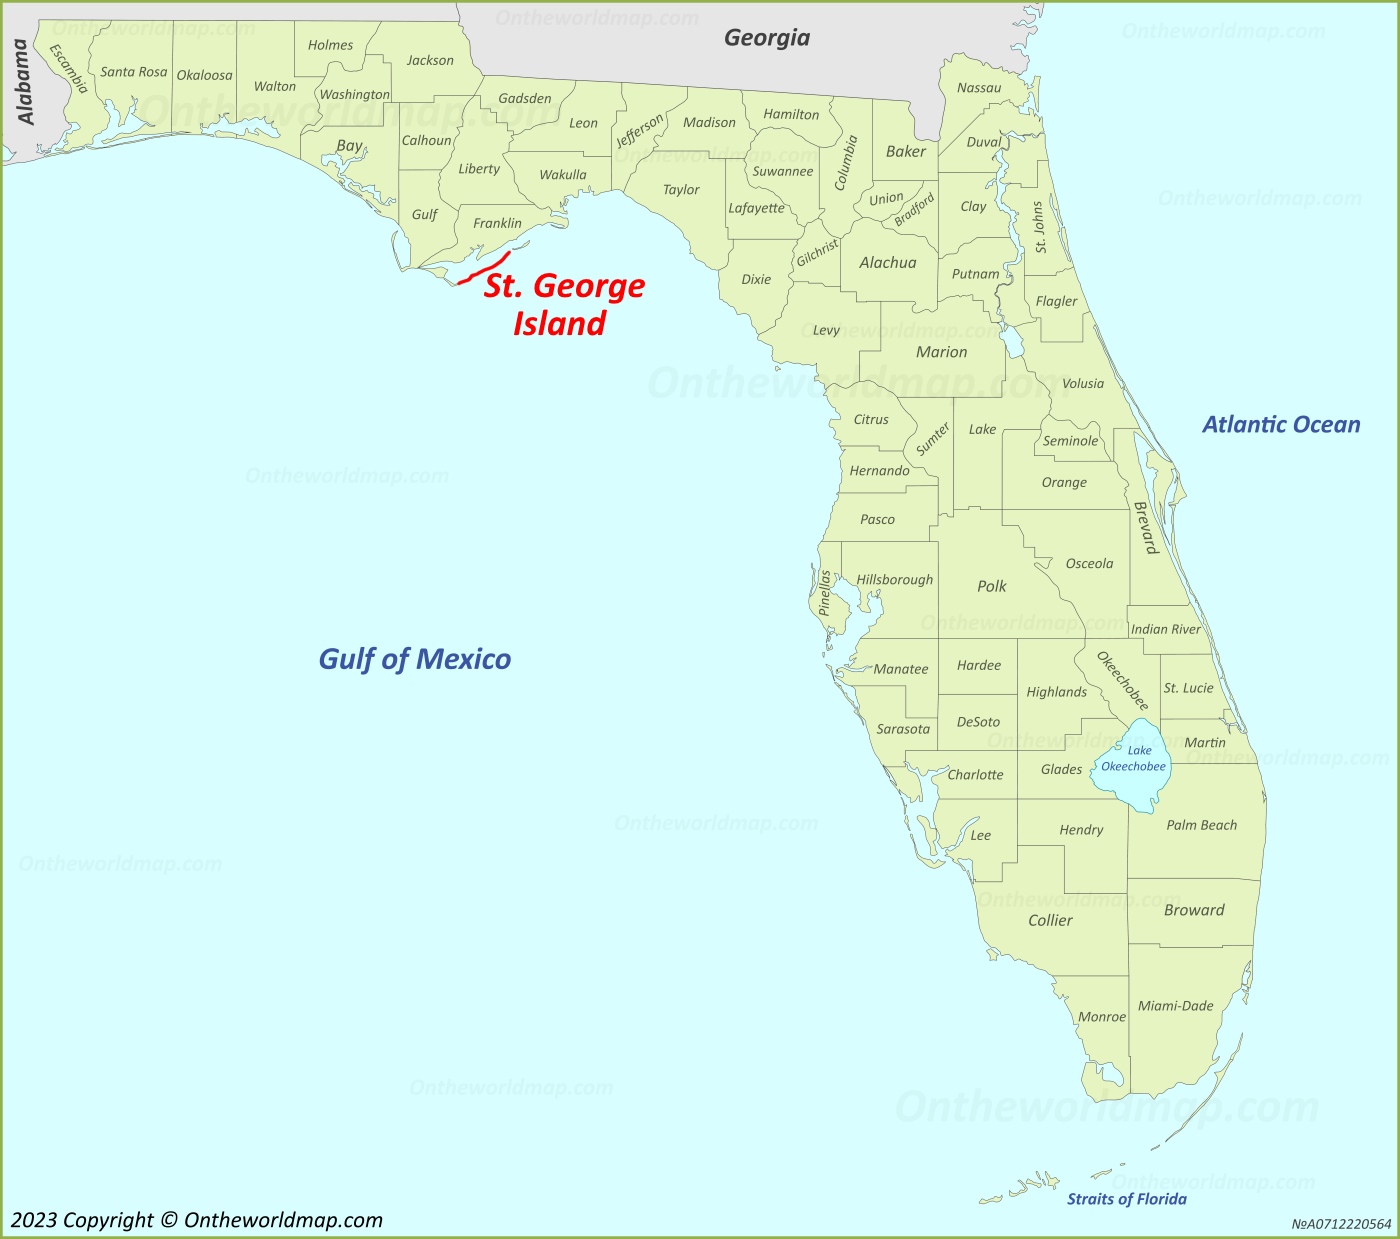 St. George Island Location On The Florida Map